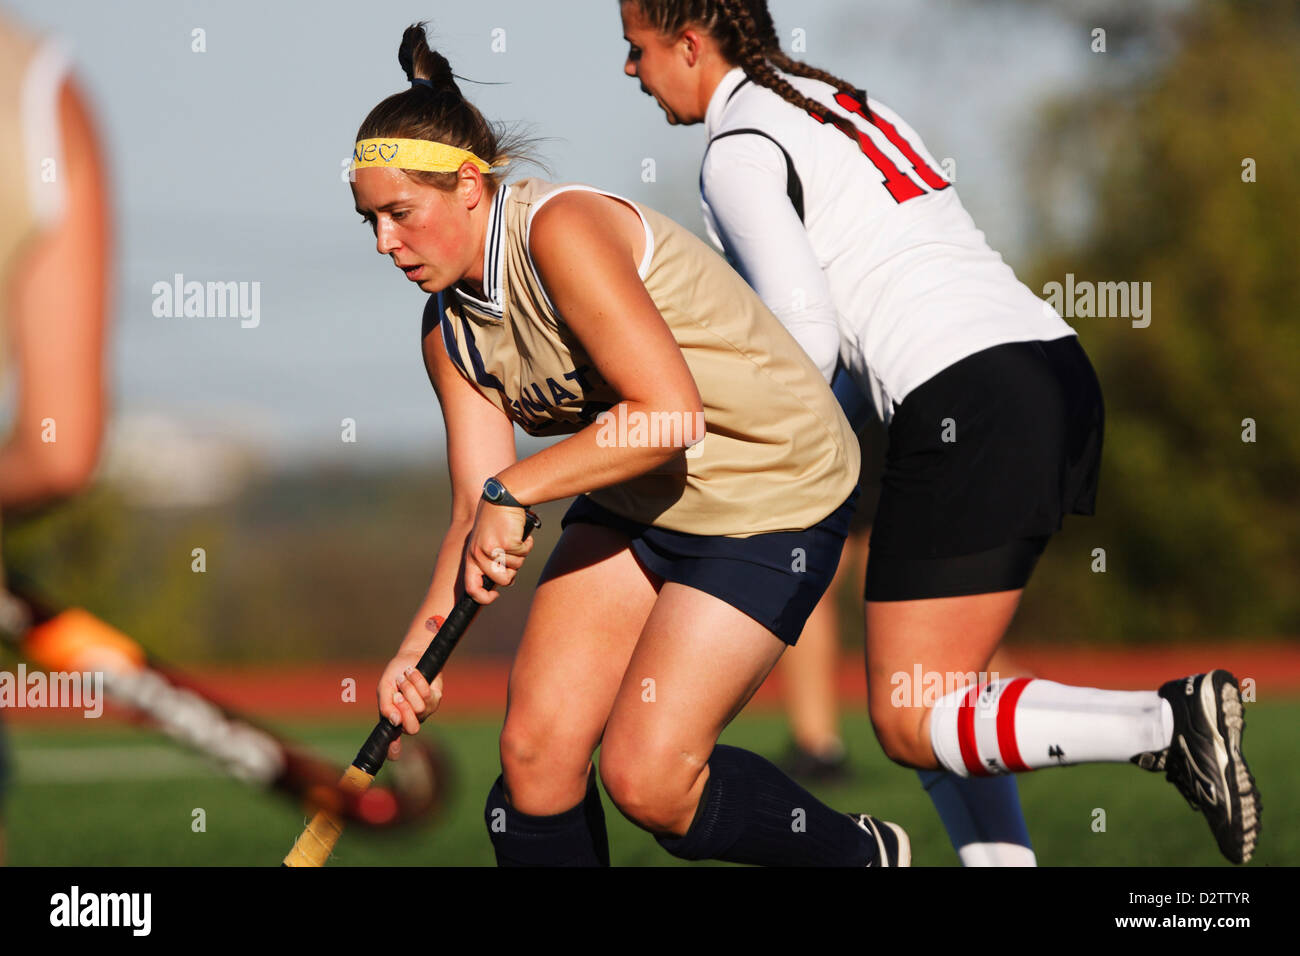 A Juniata College player competes against Catholic University in the Landmark Conference field hockey championship. Stock Photo